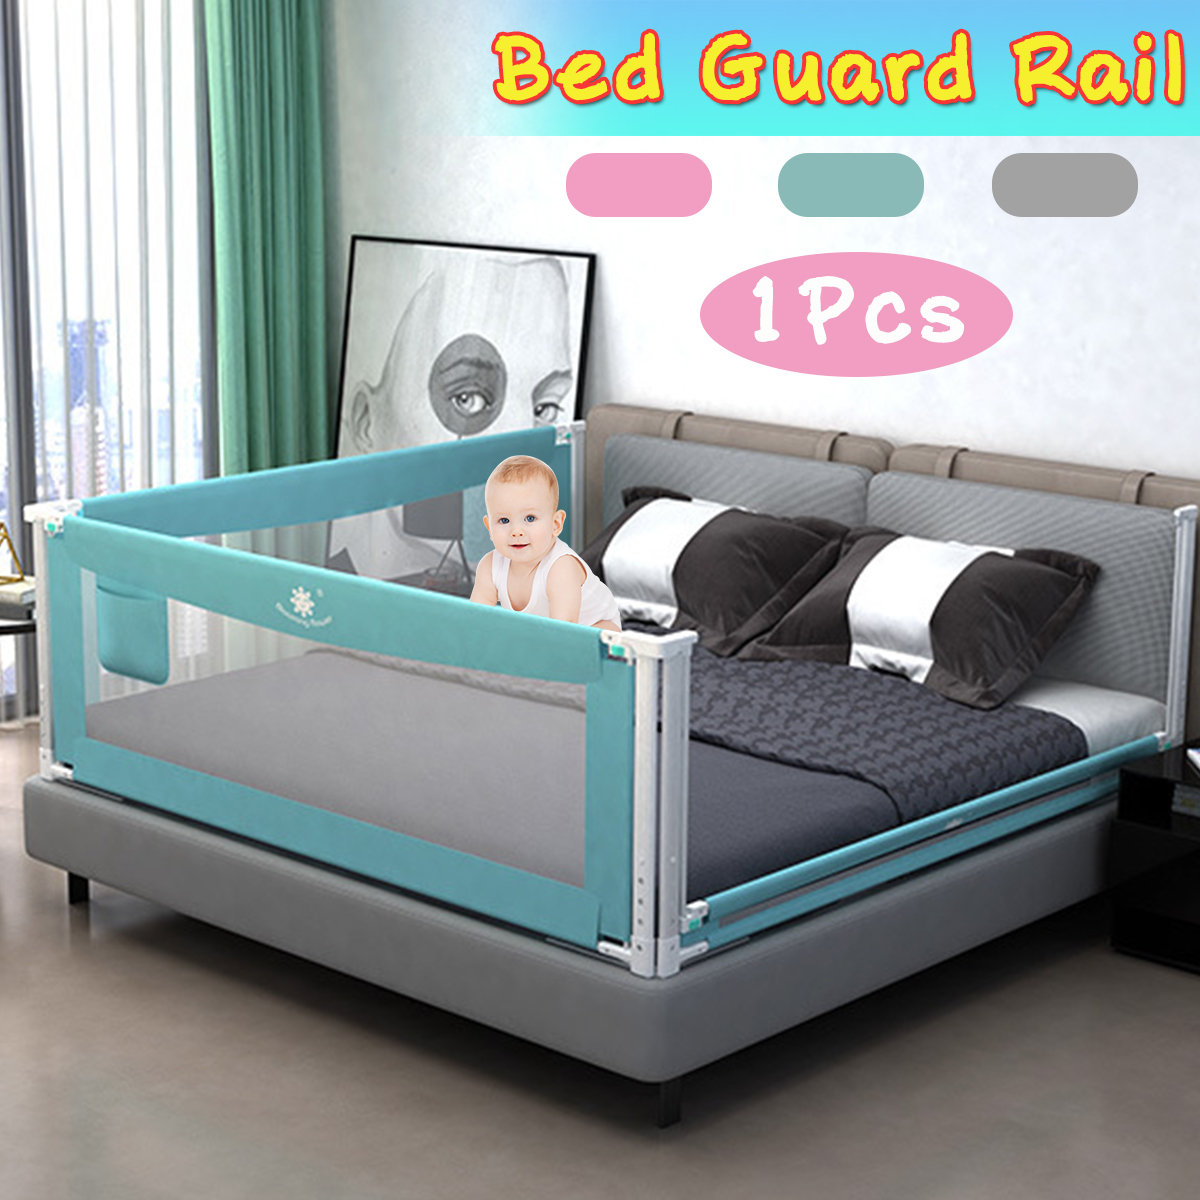 18222M-Child-Safety-Bed-Guard-Rail-Toddler-Crib-Side-Protector-Anti-falling-1970182-14